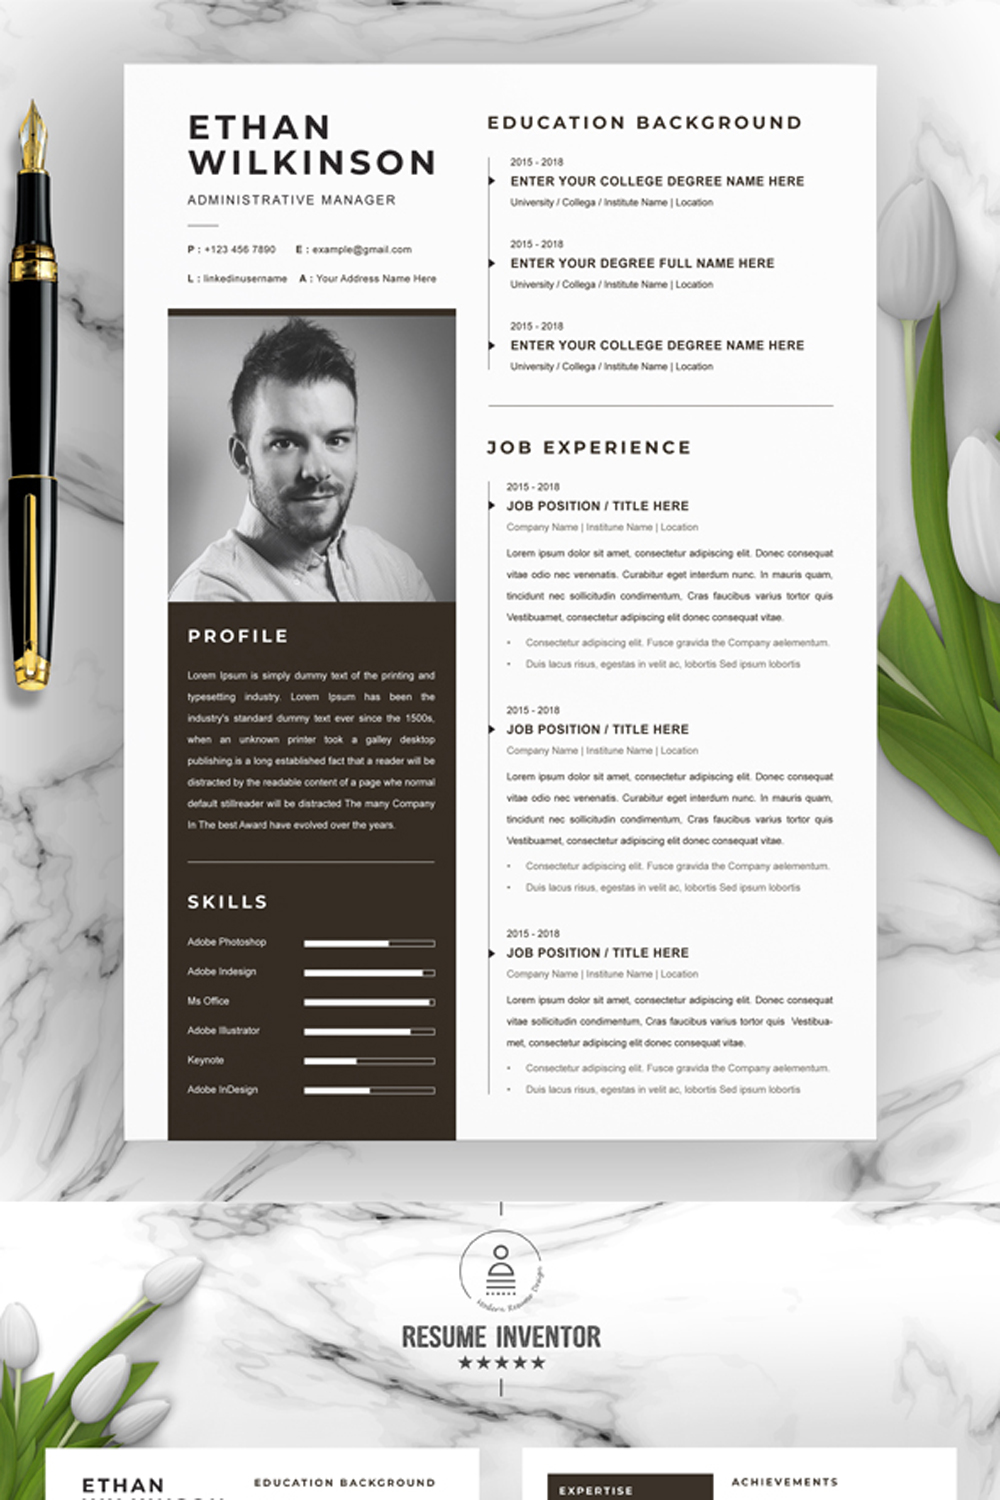 Administrative Manager CV Template | Best Minimal Resume Template pinterest preview image.